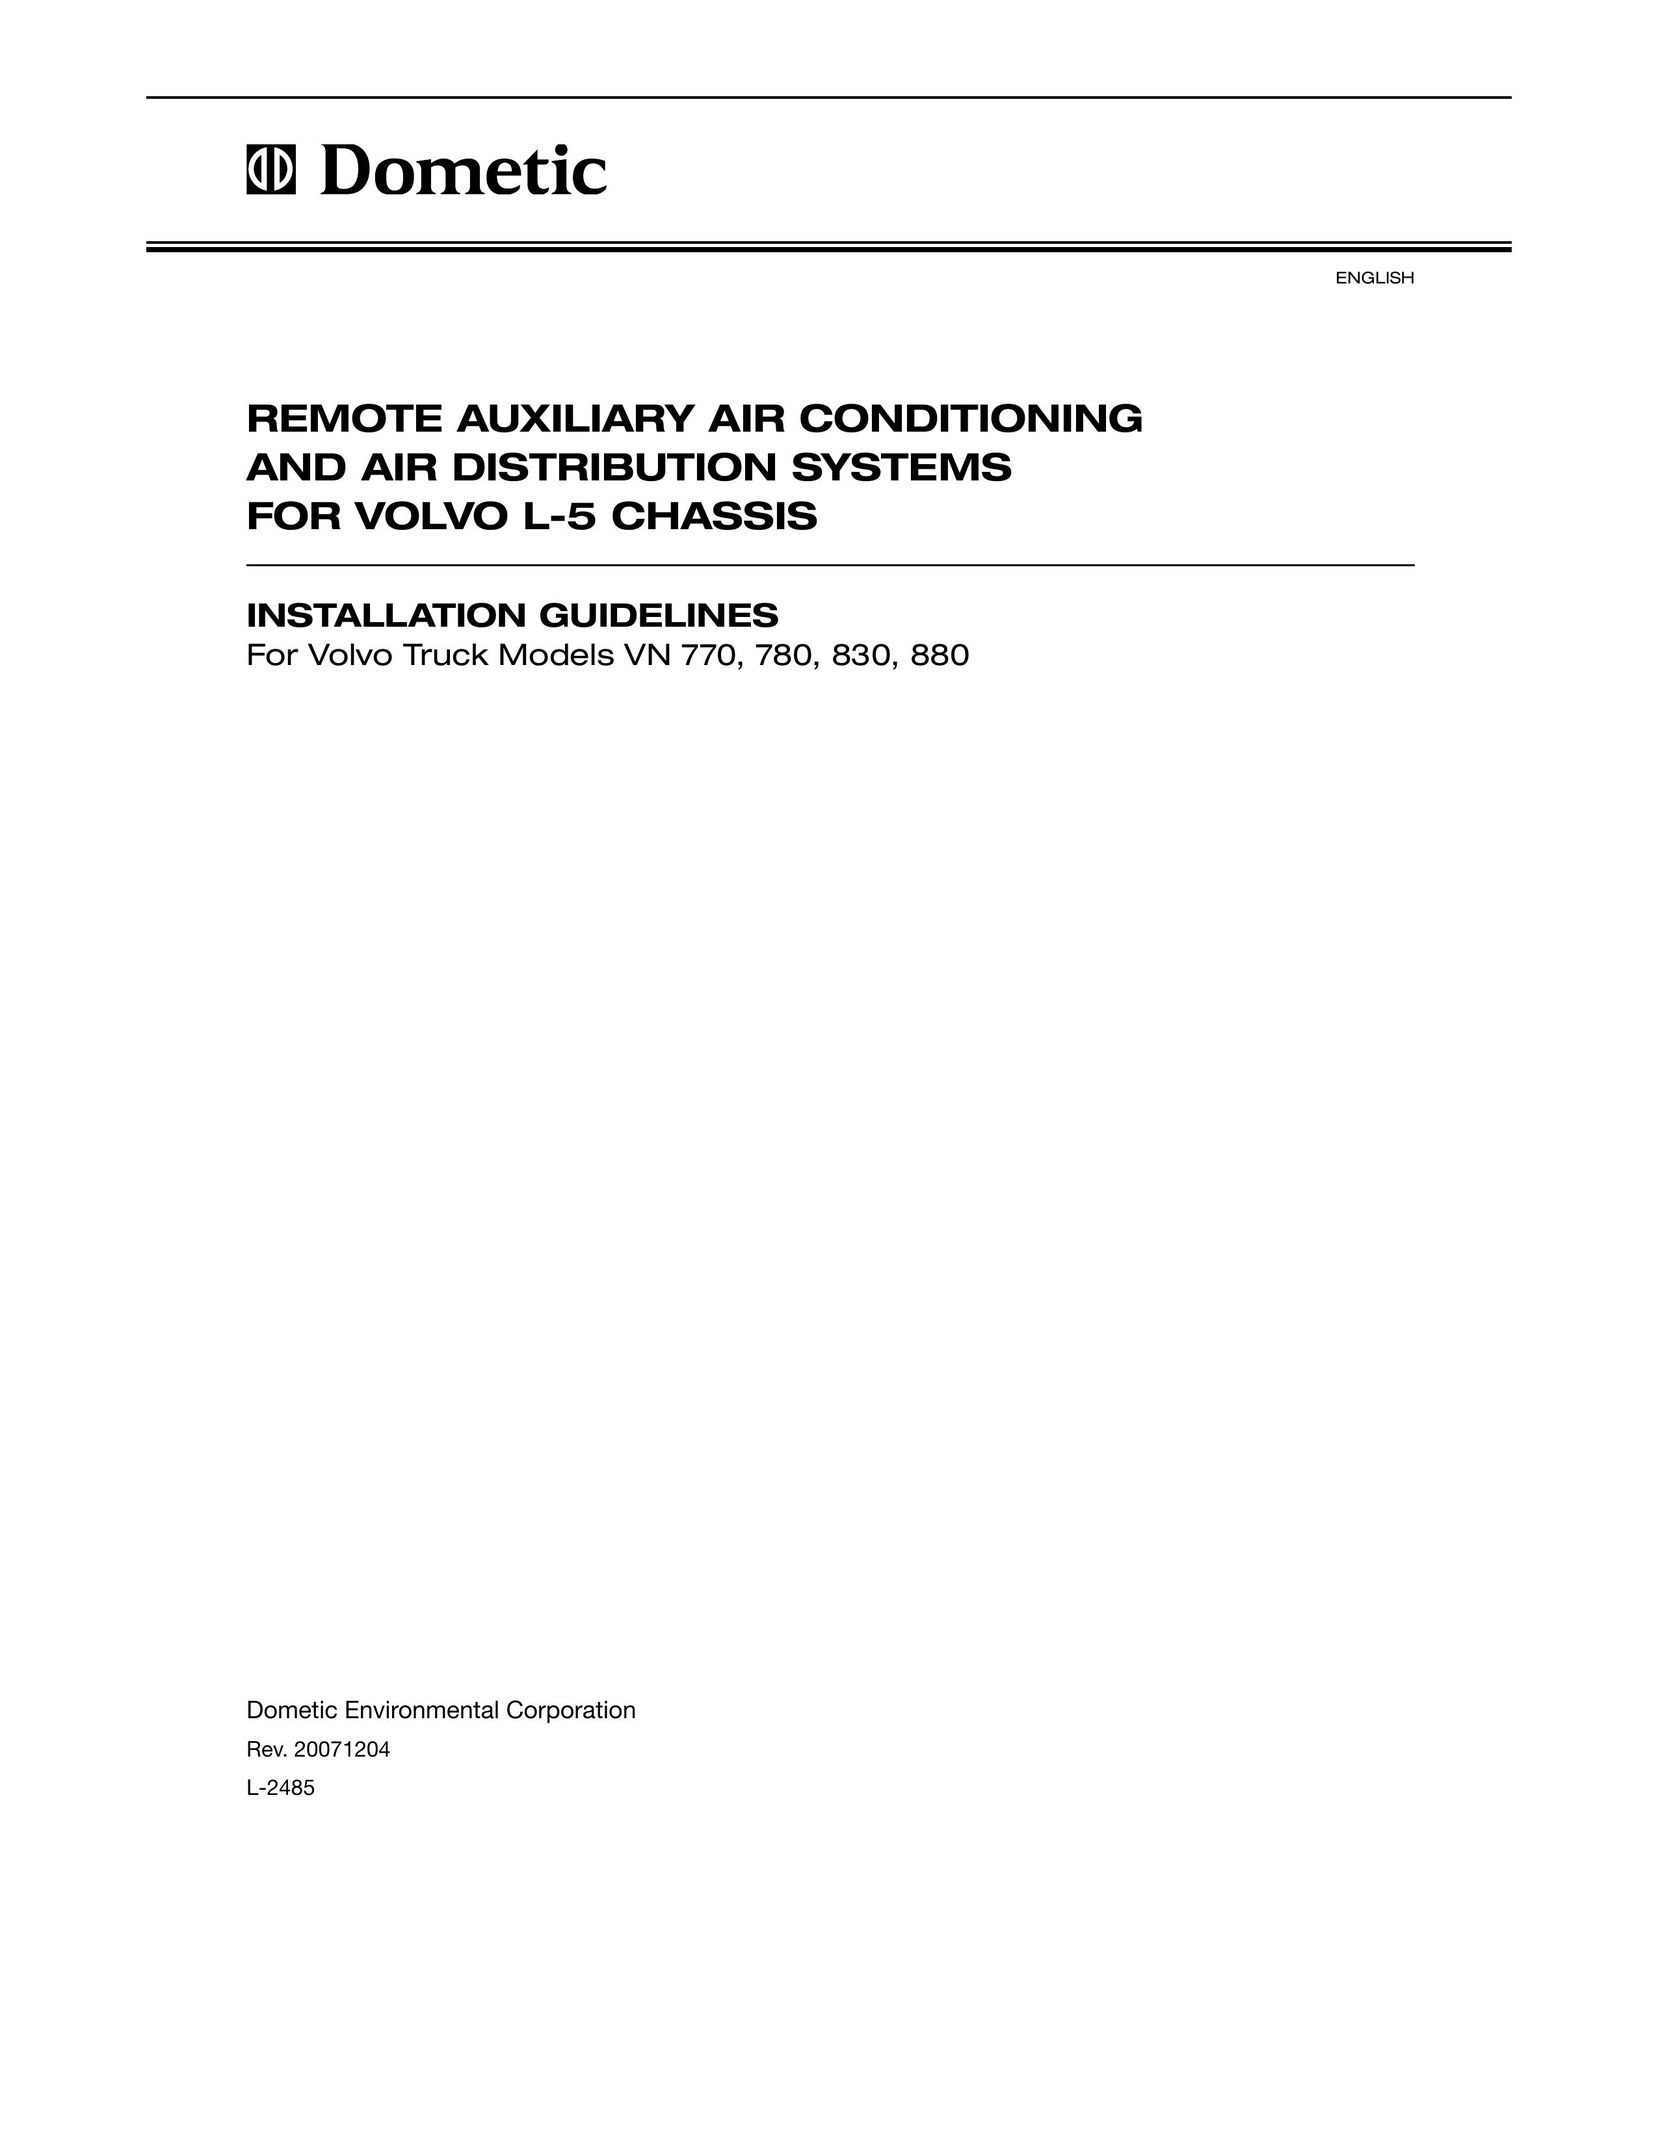 Dometic VN 830 Air Conditioner User Manual